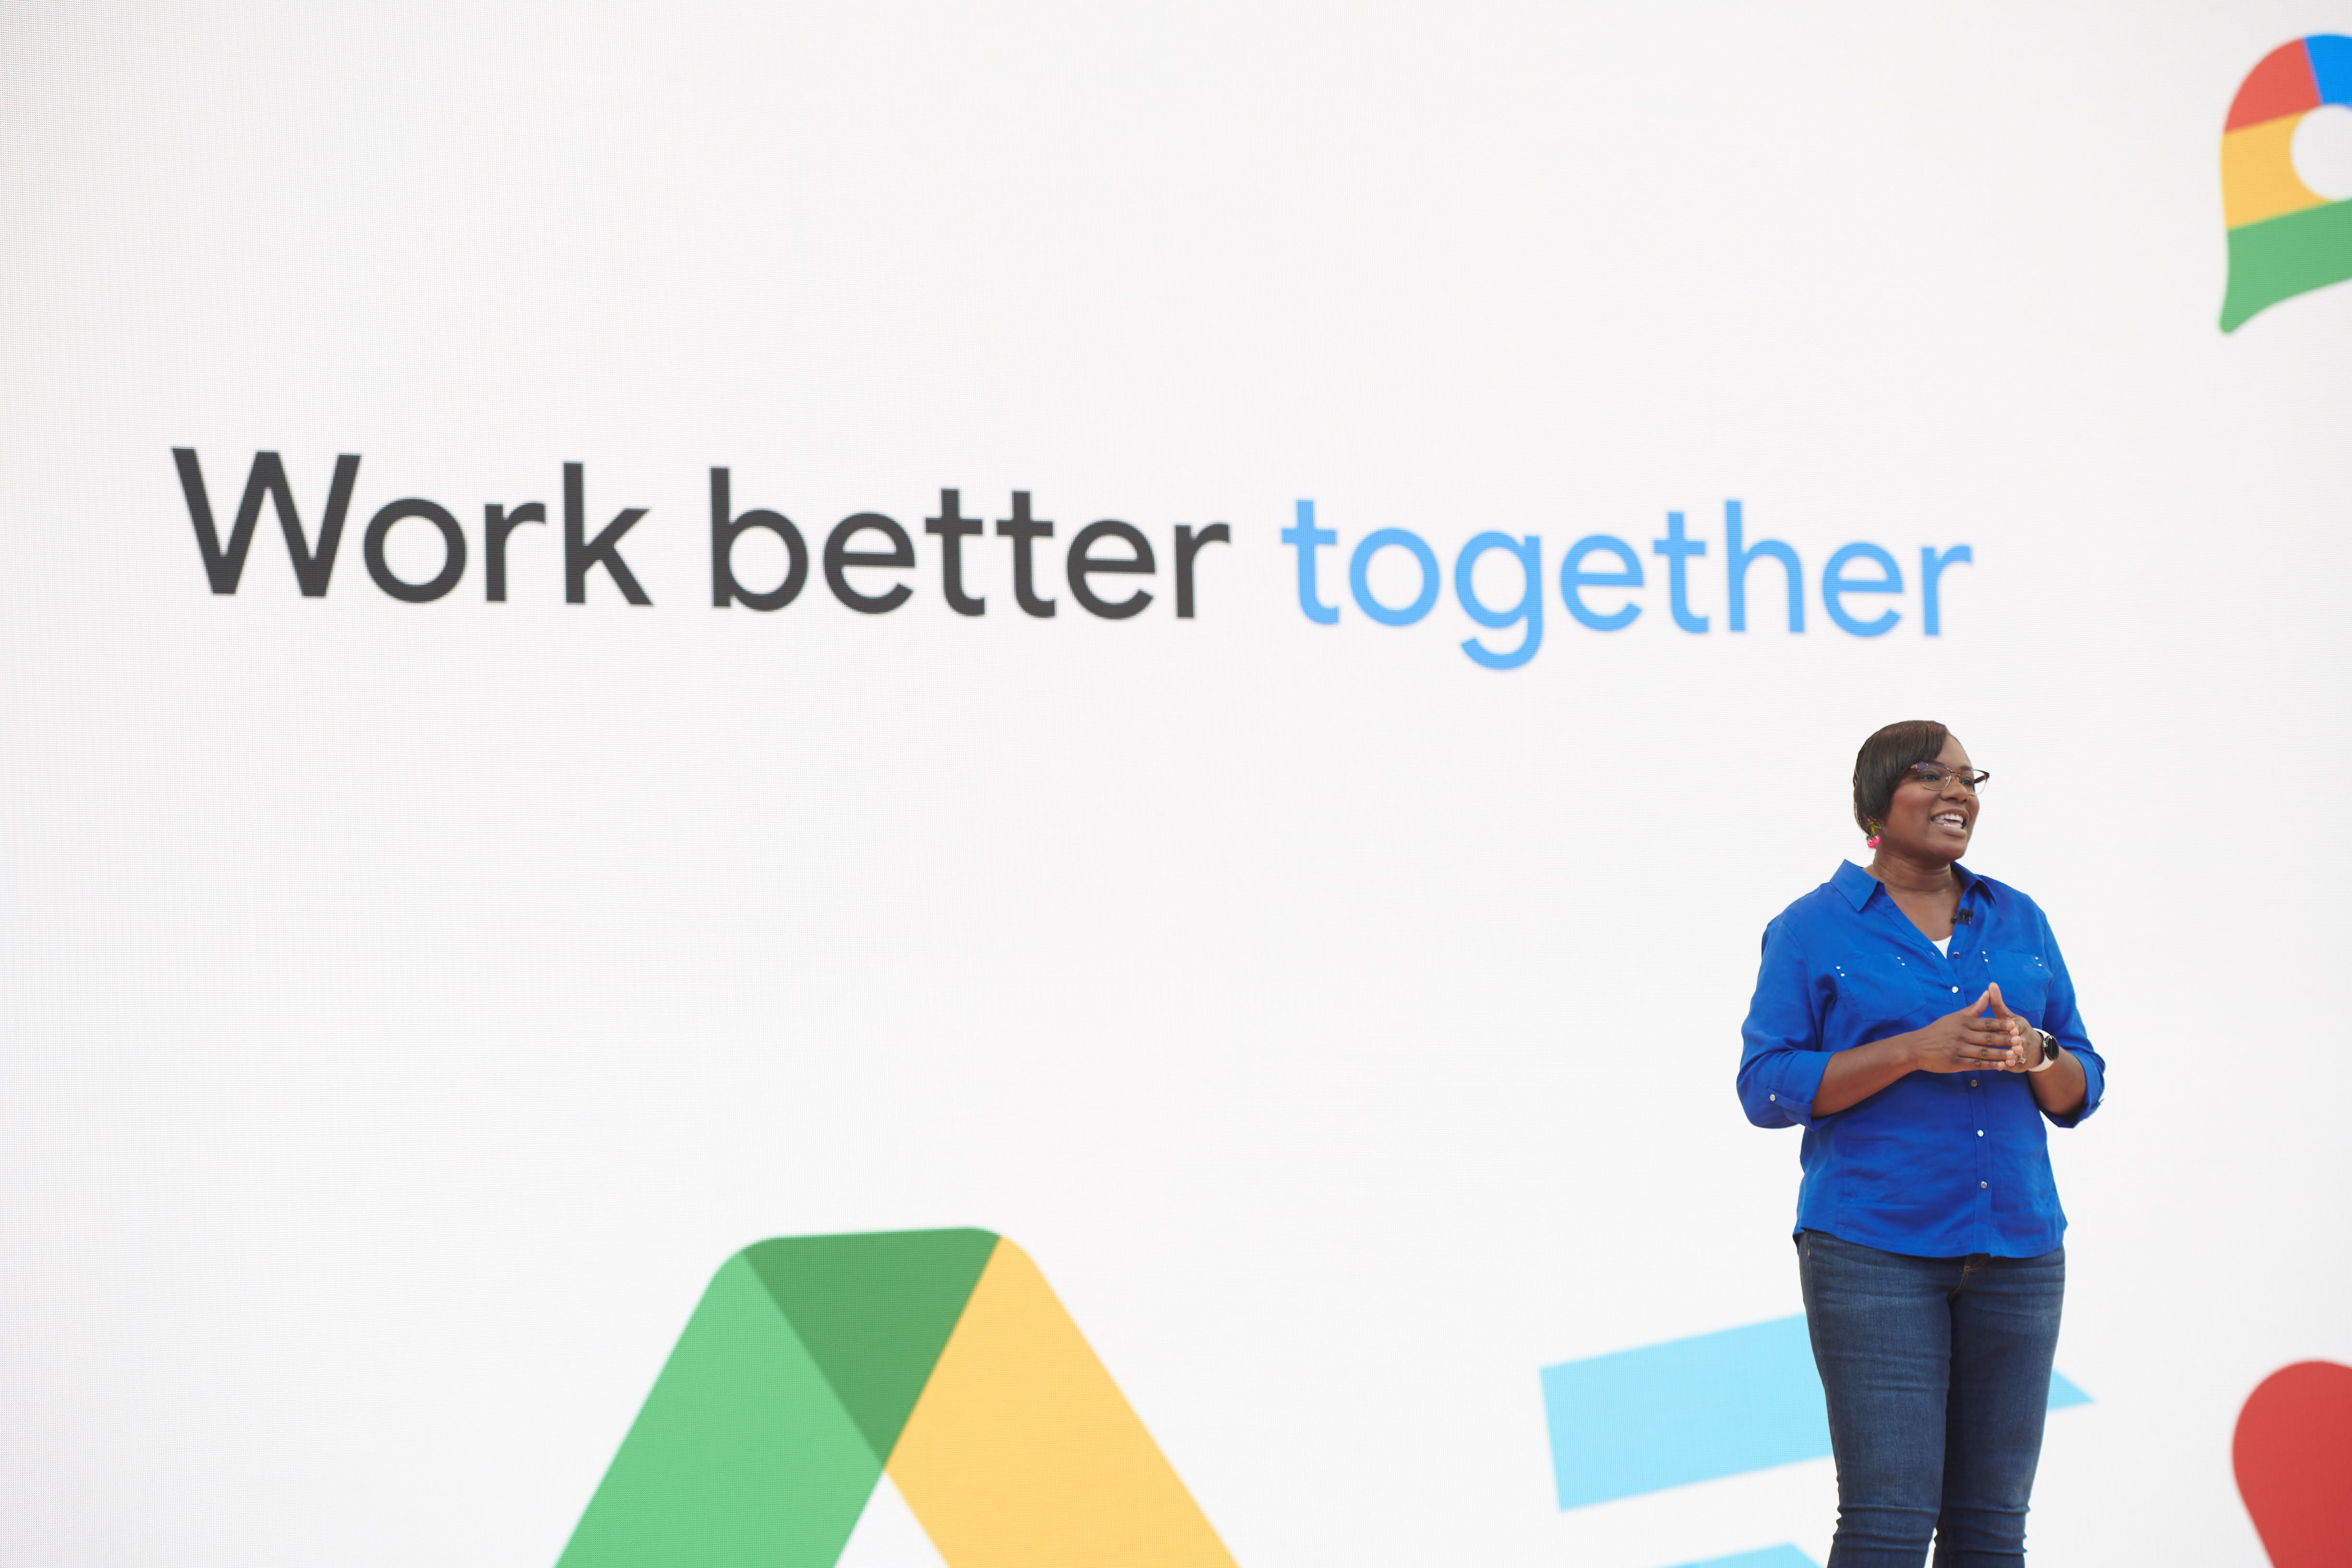 Google I/O 2022: A woman on stage describes Google's 